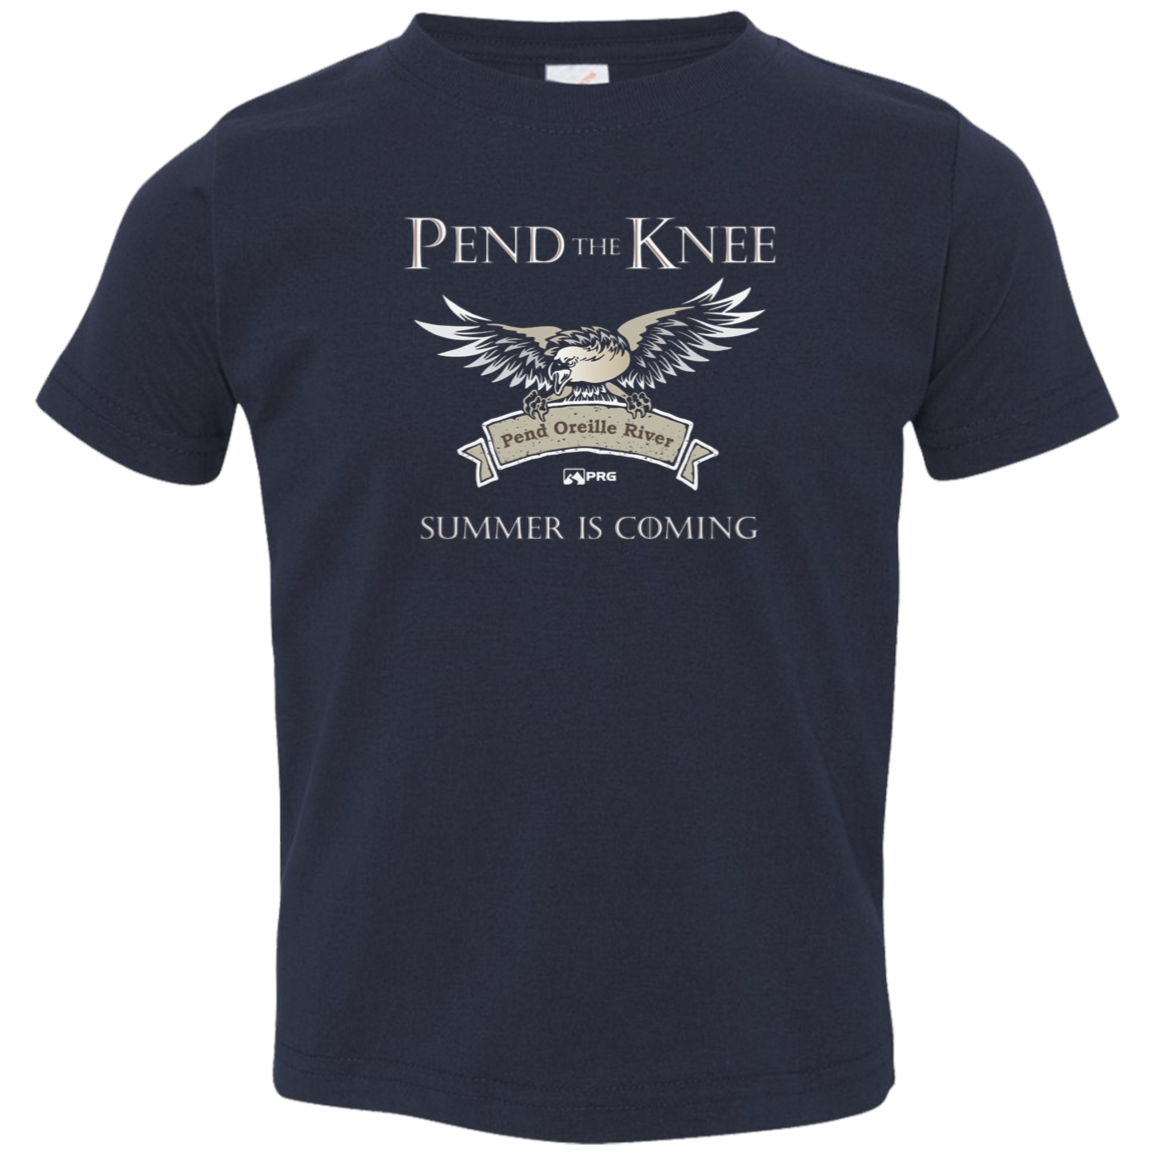 Pend the Knee - Toddler Shirt